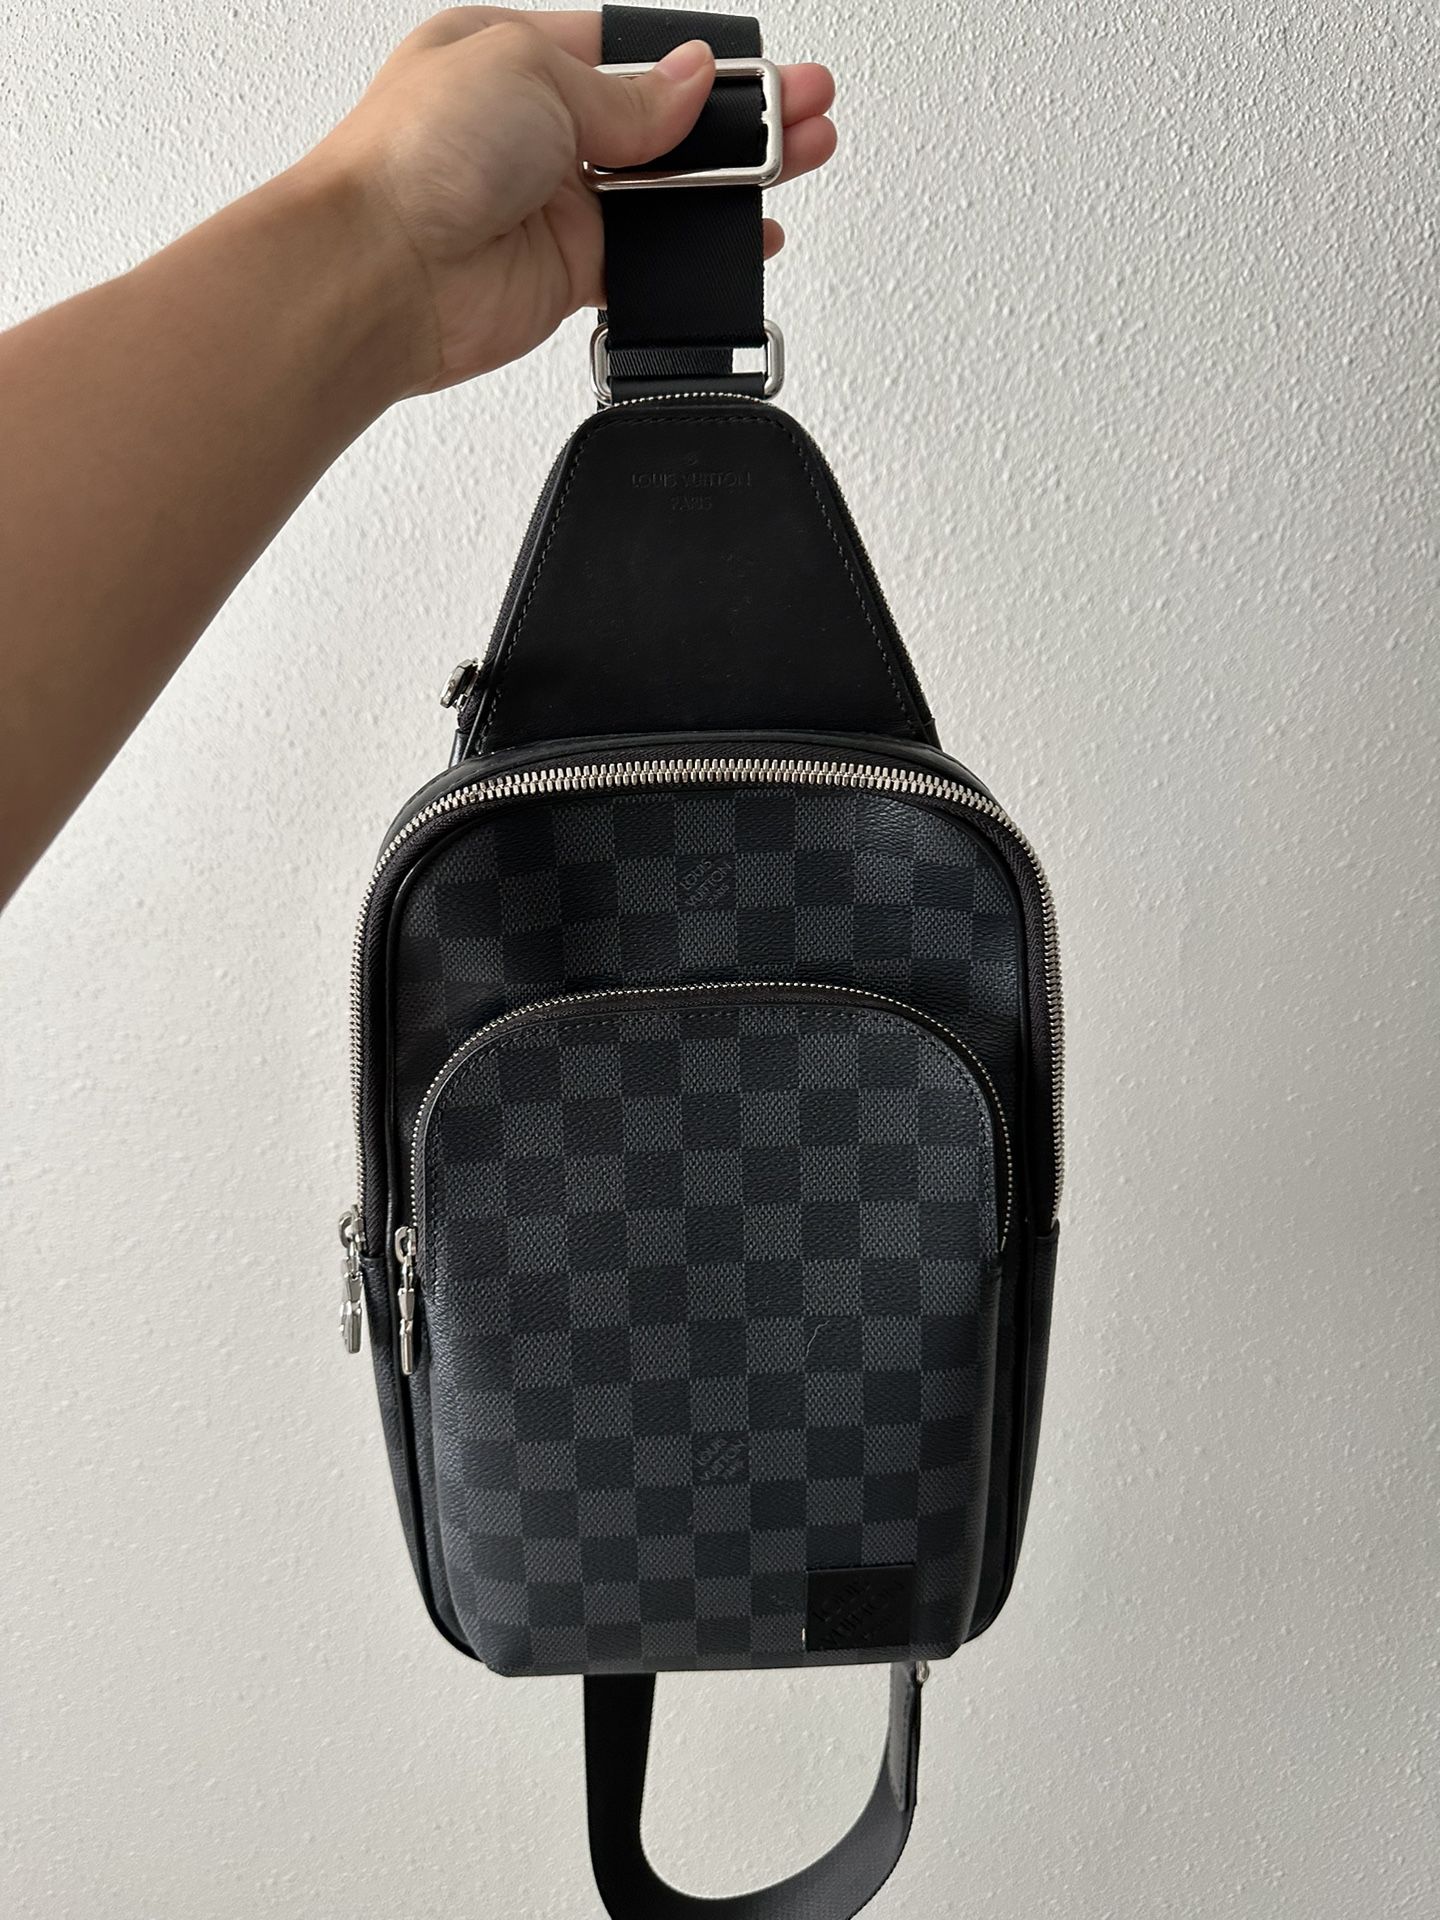 Louis Vuitton for Sale in WA, US - OfferUp